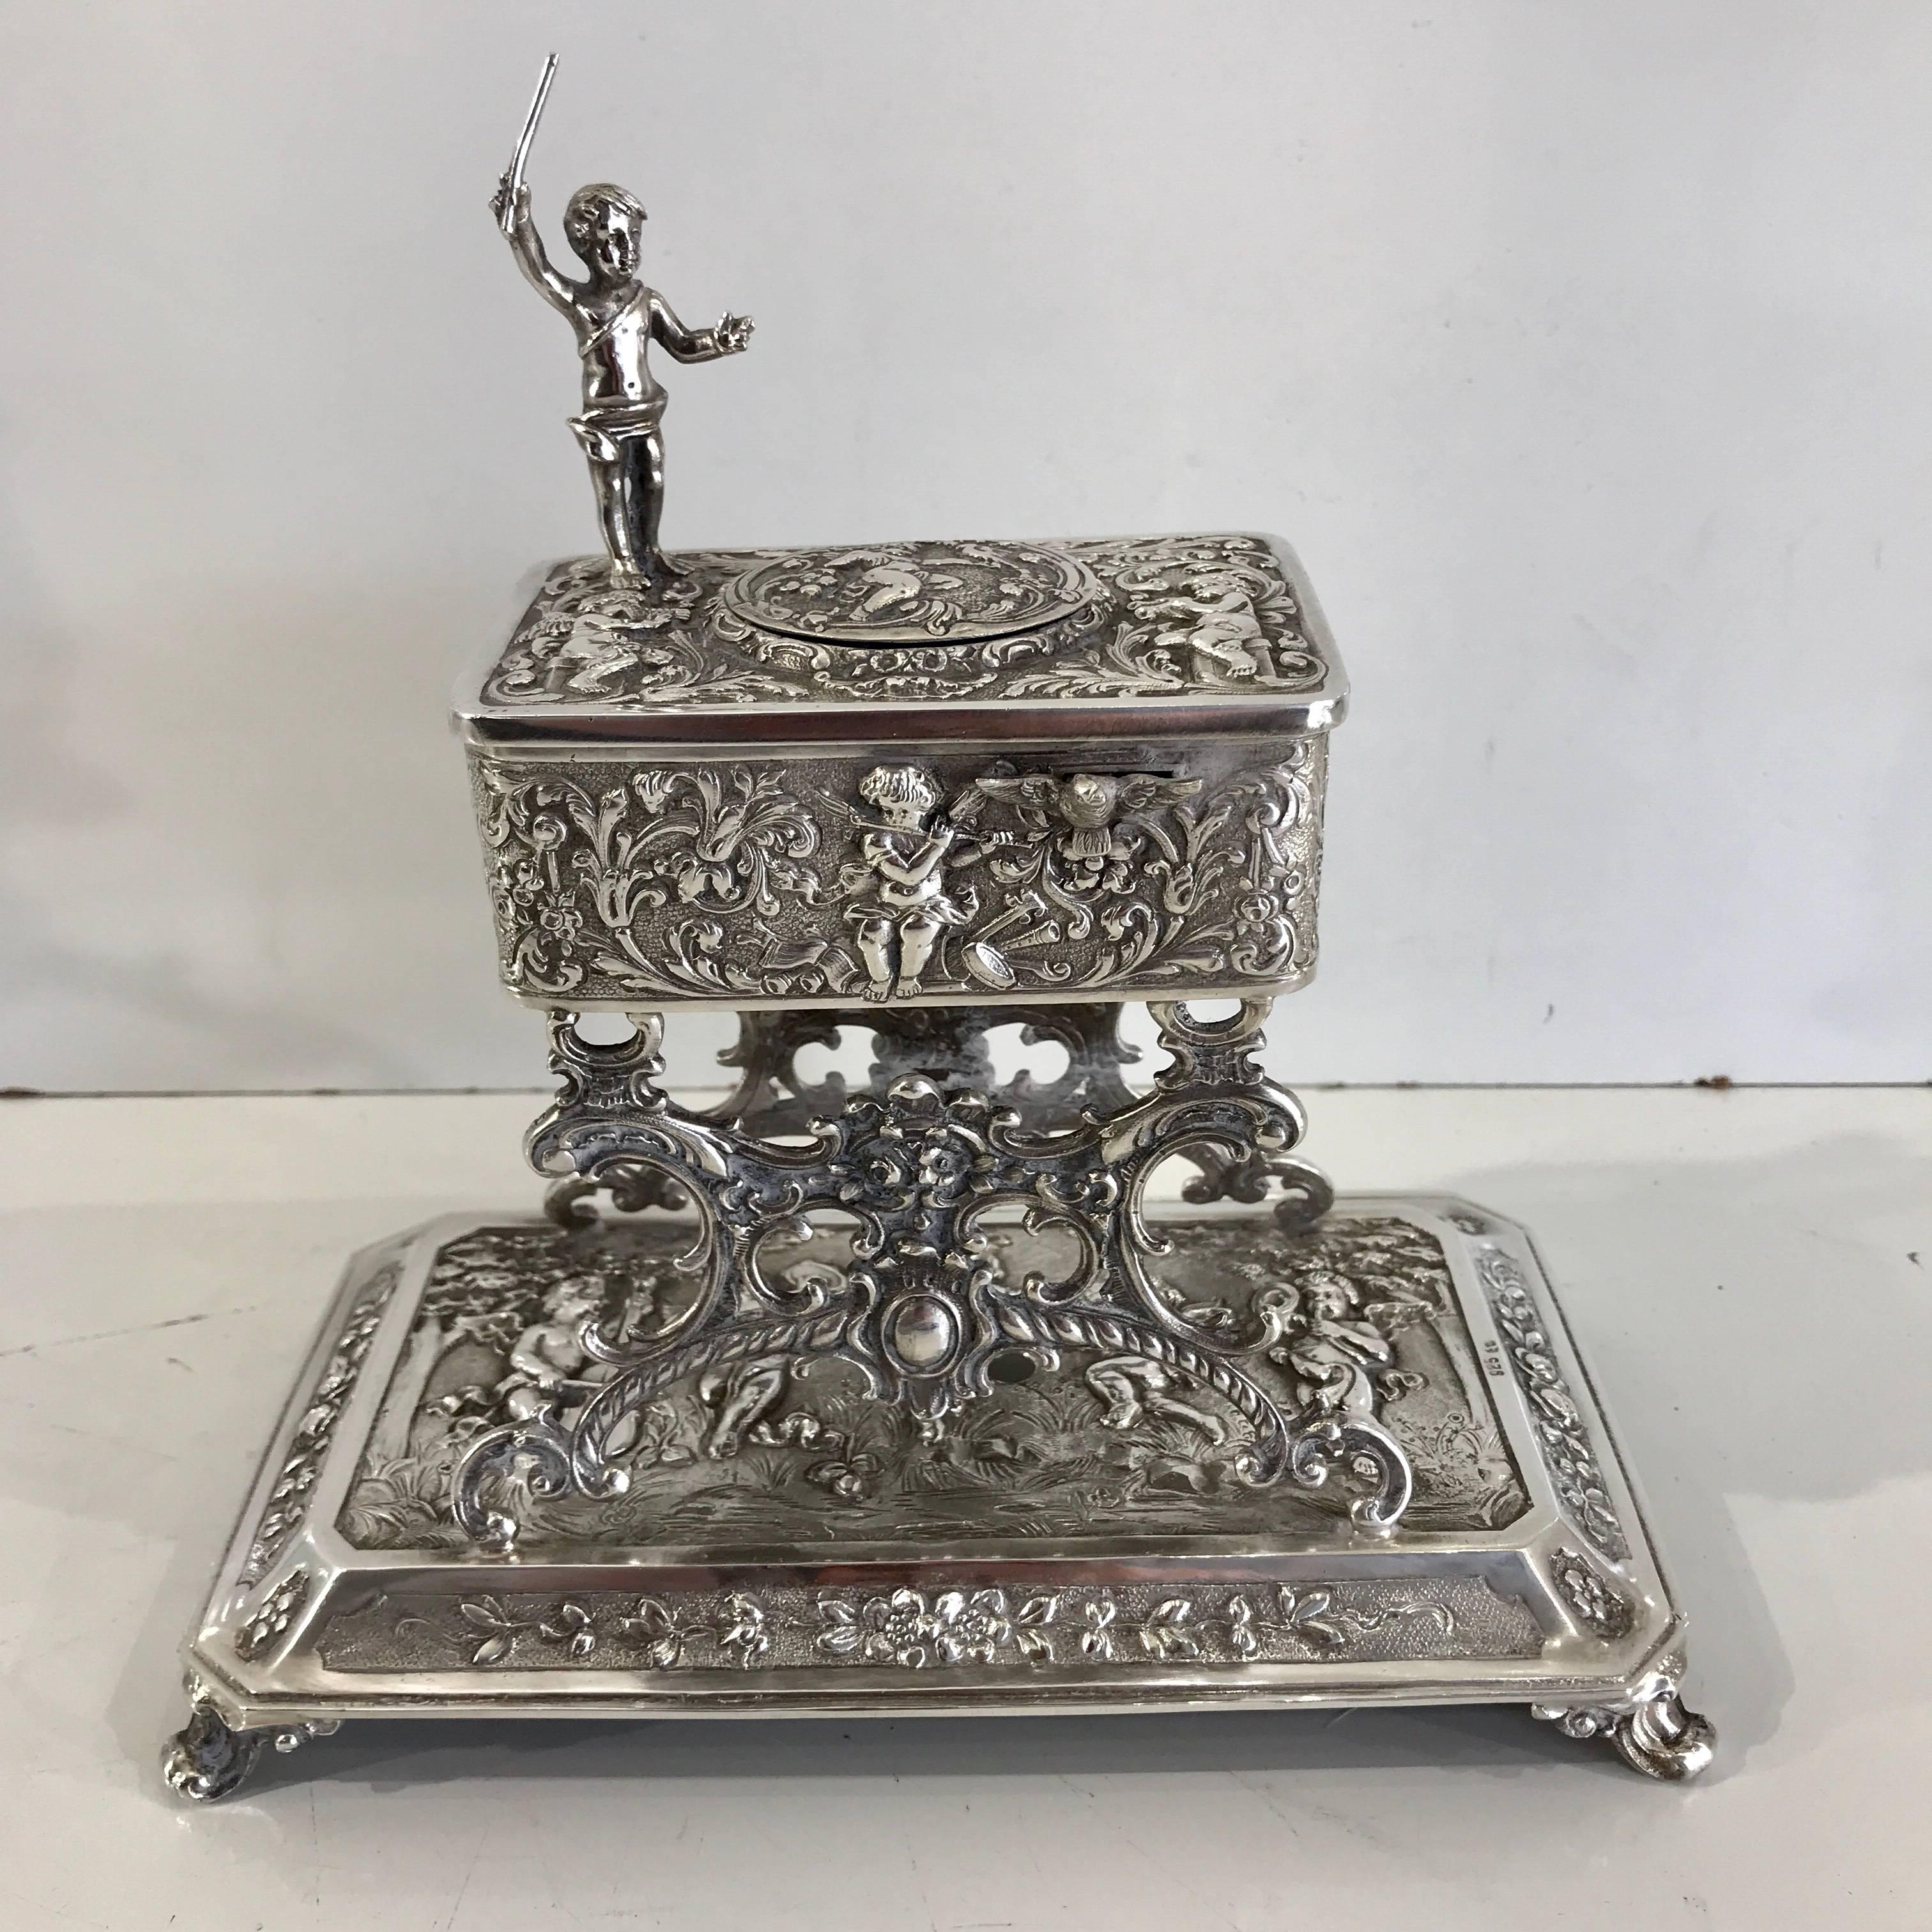 Large figural sterling singing bird table box. An elevated Rococo style rectangular bird box standing on four legs. The automaton bird is activated by a sliding lever with figural putto conductor above. When activated the vibrant miniature preening